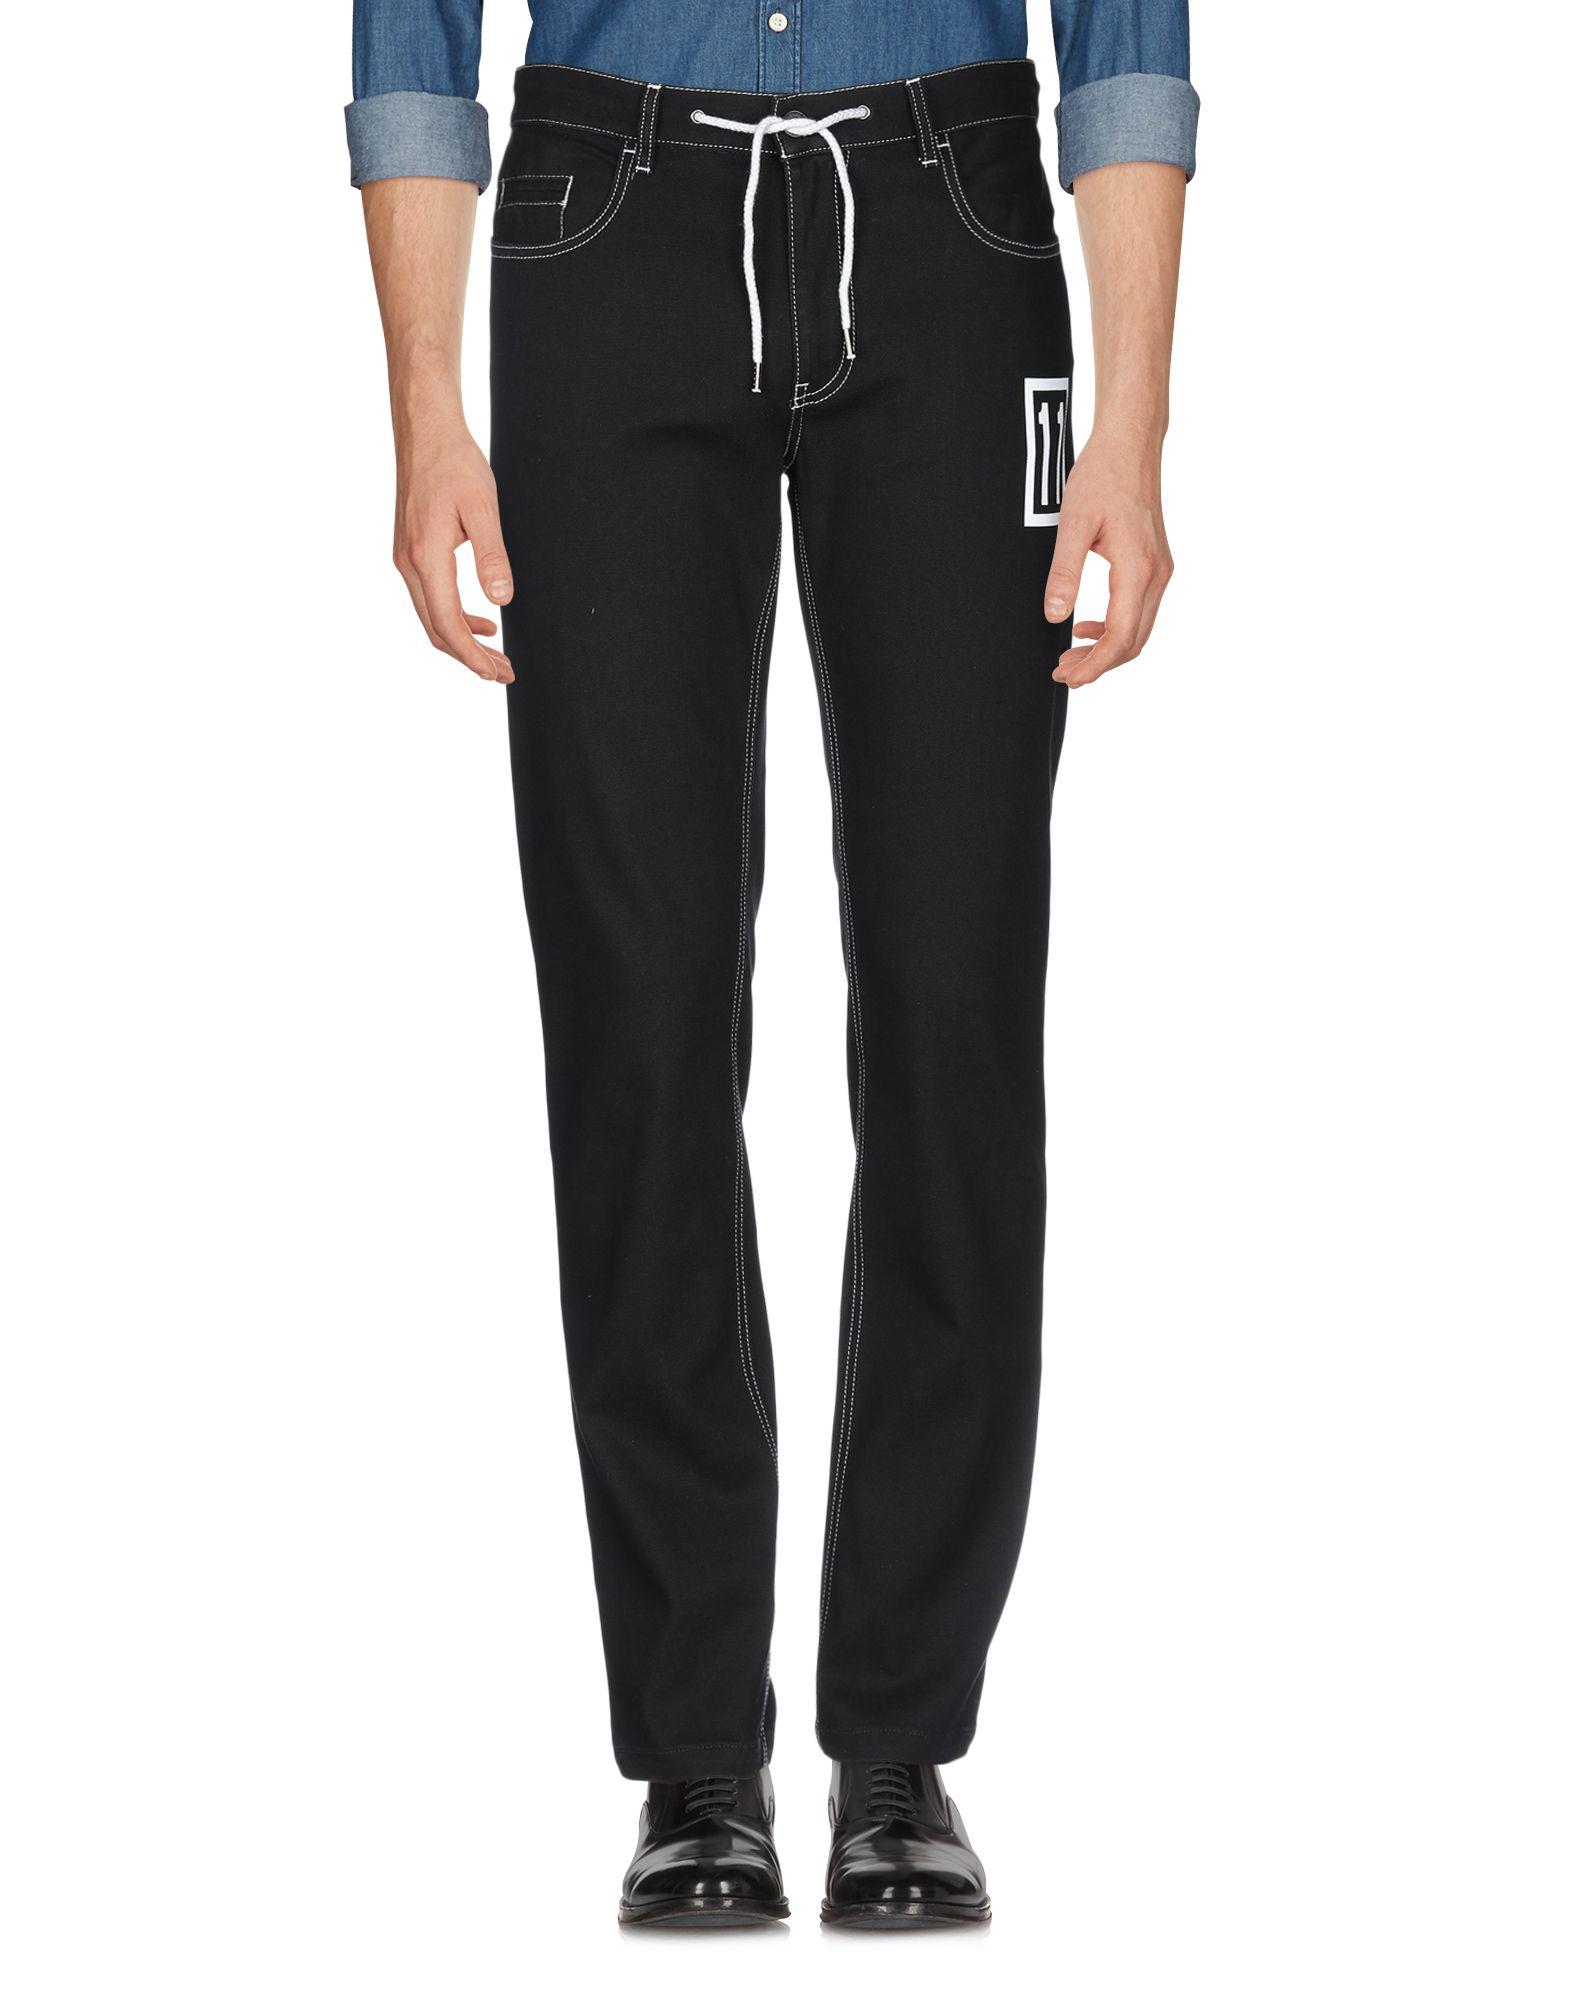 Bikkembergs Cotton Casual Pants in Black for Men - Lyst